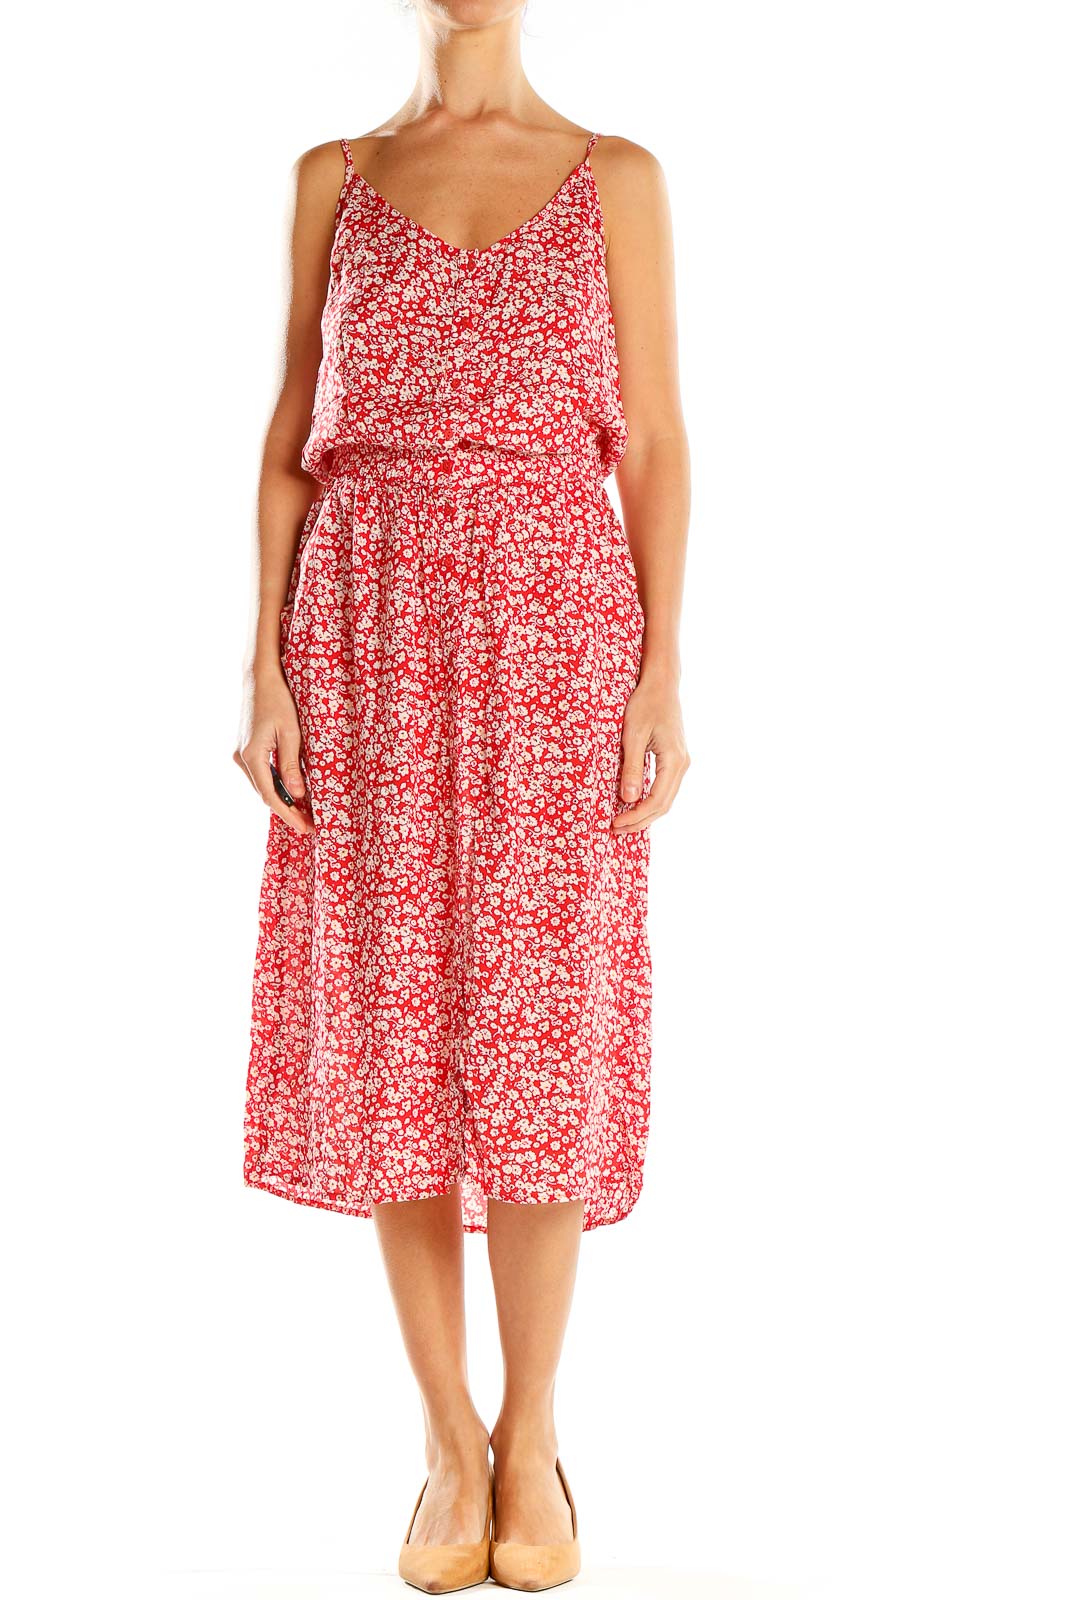 Red Floral Print Chic Midi Dress Front